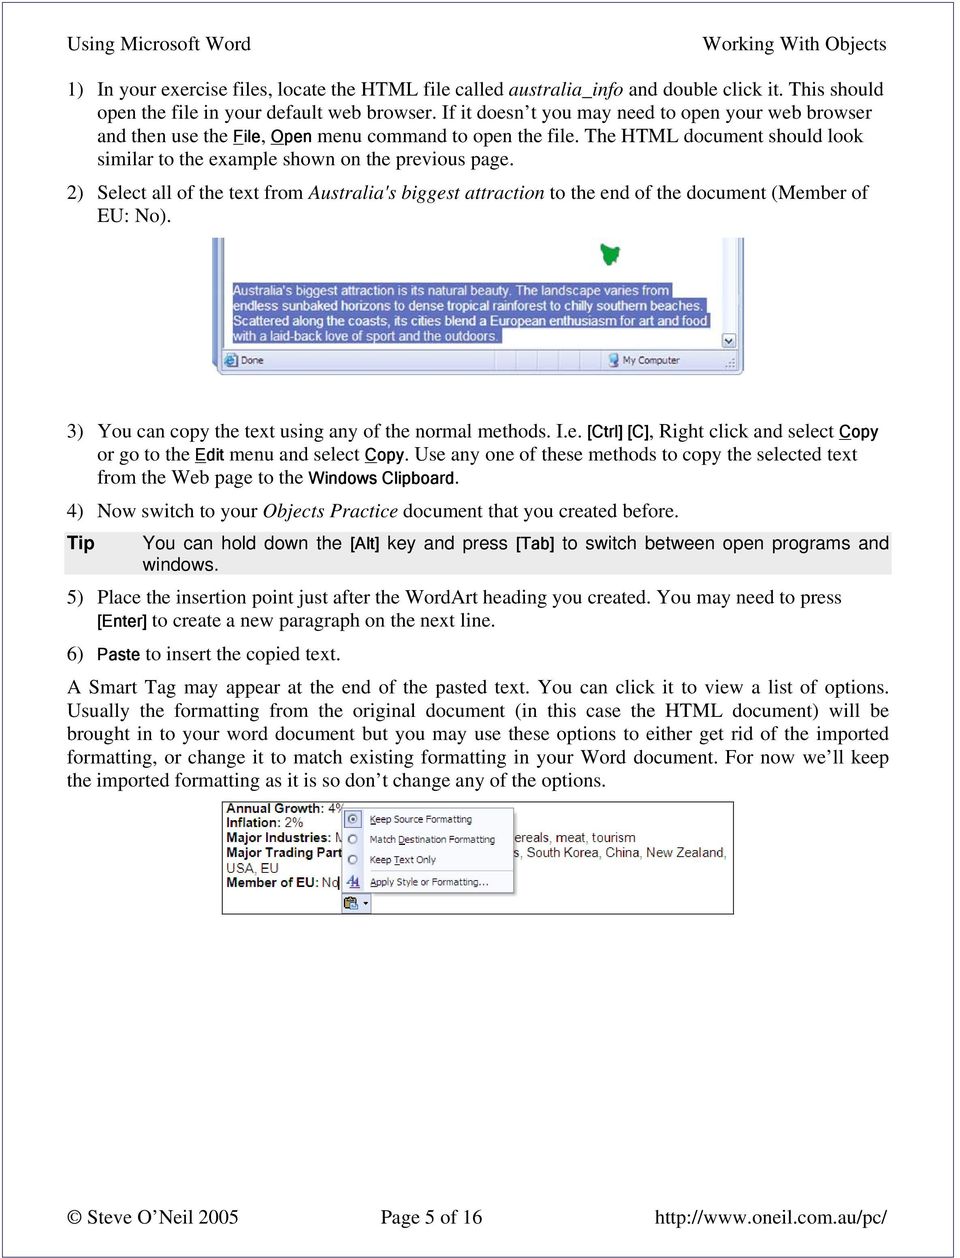 2) Select all of the text from Australia's biggest attraction to the end of the document (Member of EU: No). 3) You can copy the text using any of the normal methods. I.e. [Ctrl] [C], Right click and select Copy or go to the Edit menu and select Copy.